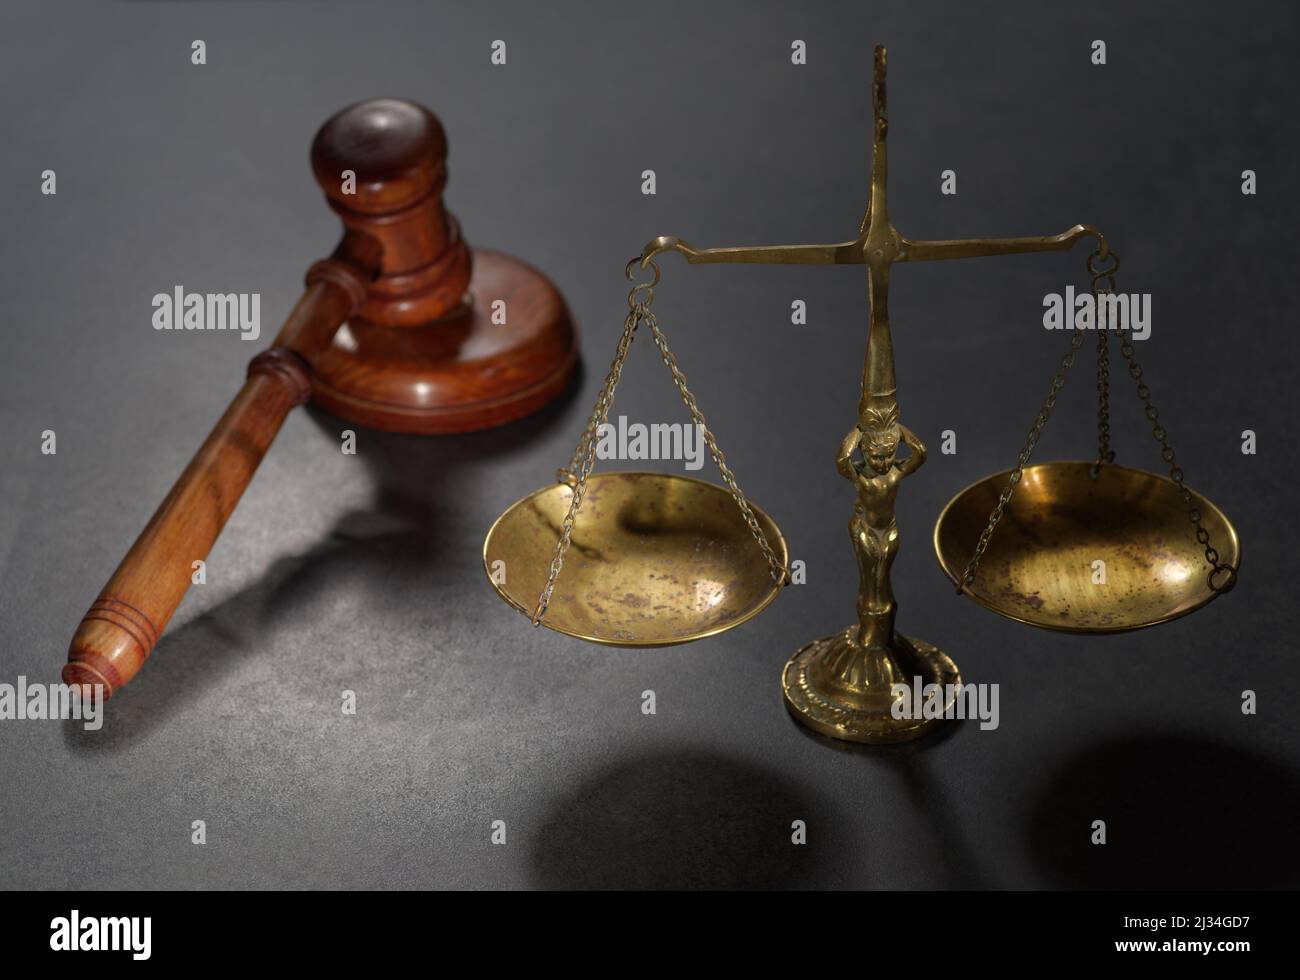 Wooden judges gavel and symbol of law and justice on table in a courtroom or law enforcement office on dark background Stock Photo